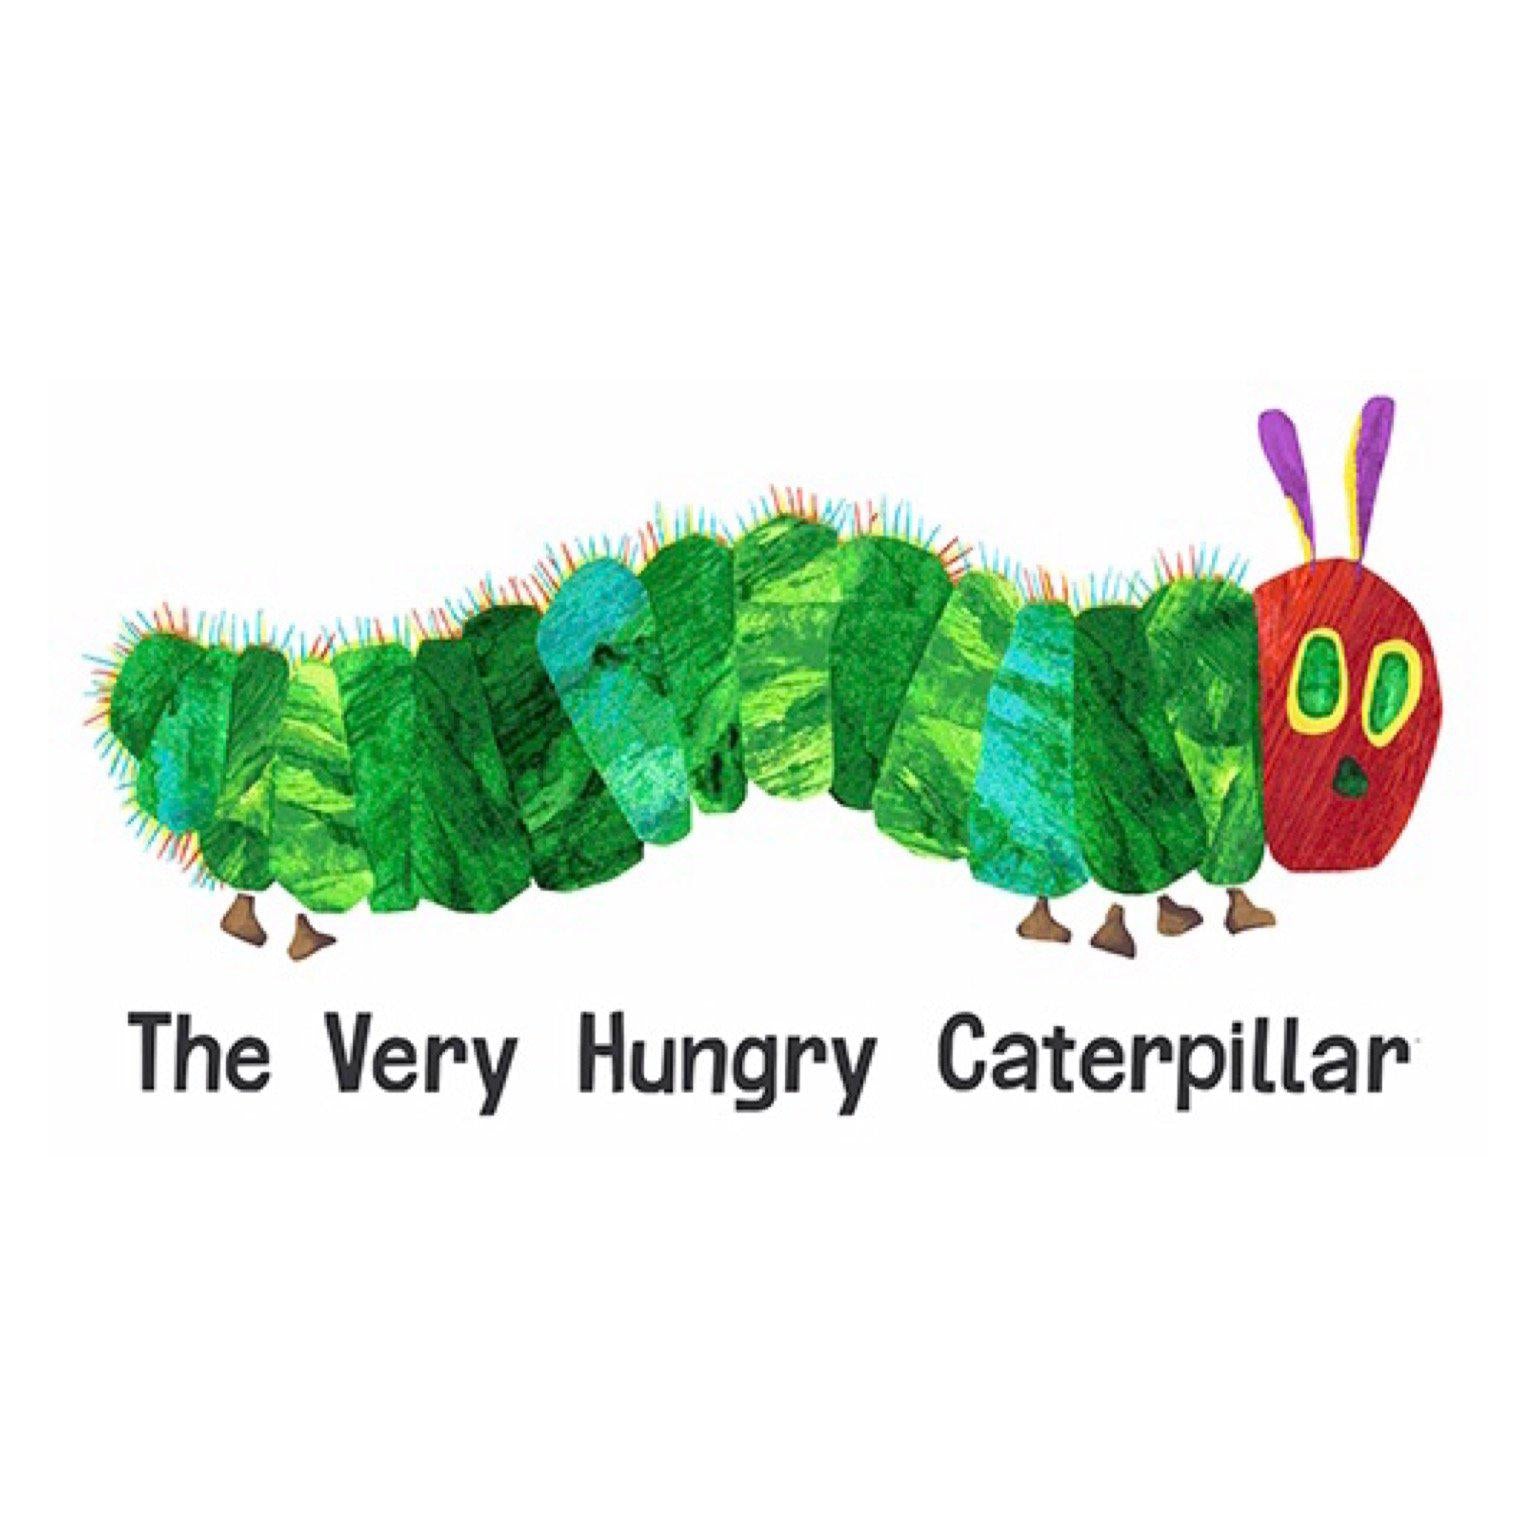 The Very Hungry Caterpillar Panel  24" x 44"